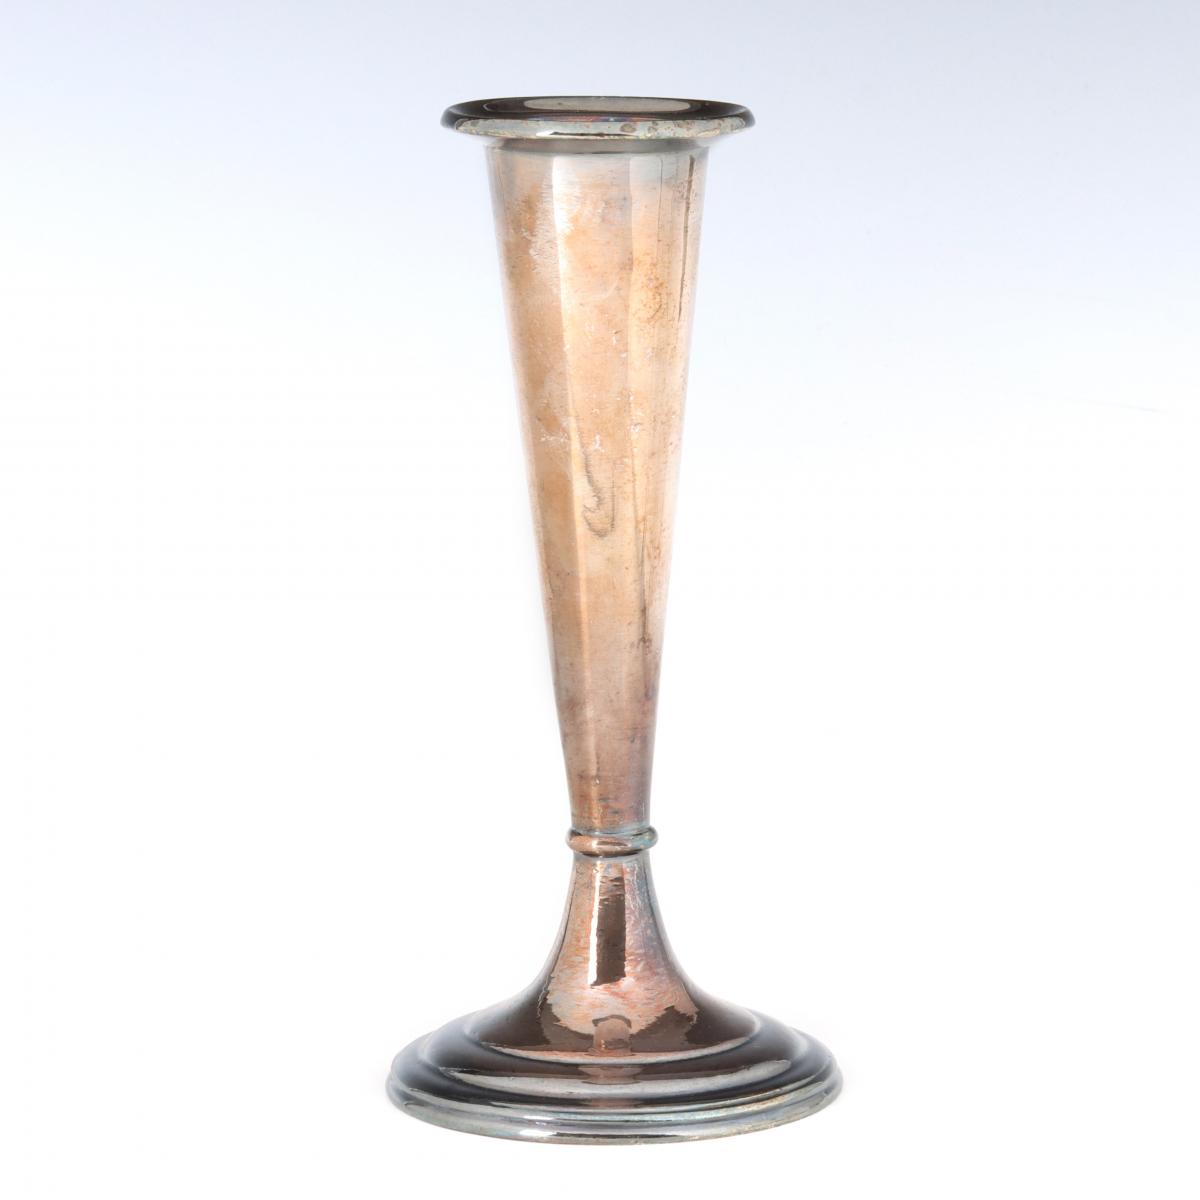 A NEW YORK CENTRAL RAILROAD SILVER PLATED BUD VASE